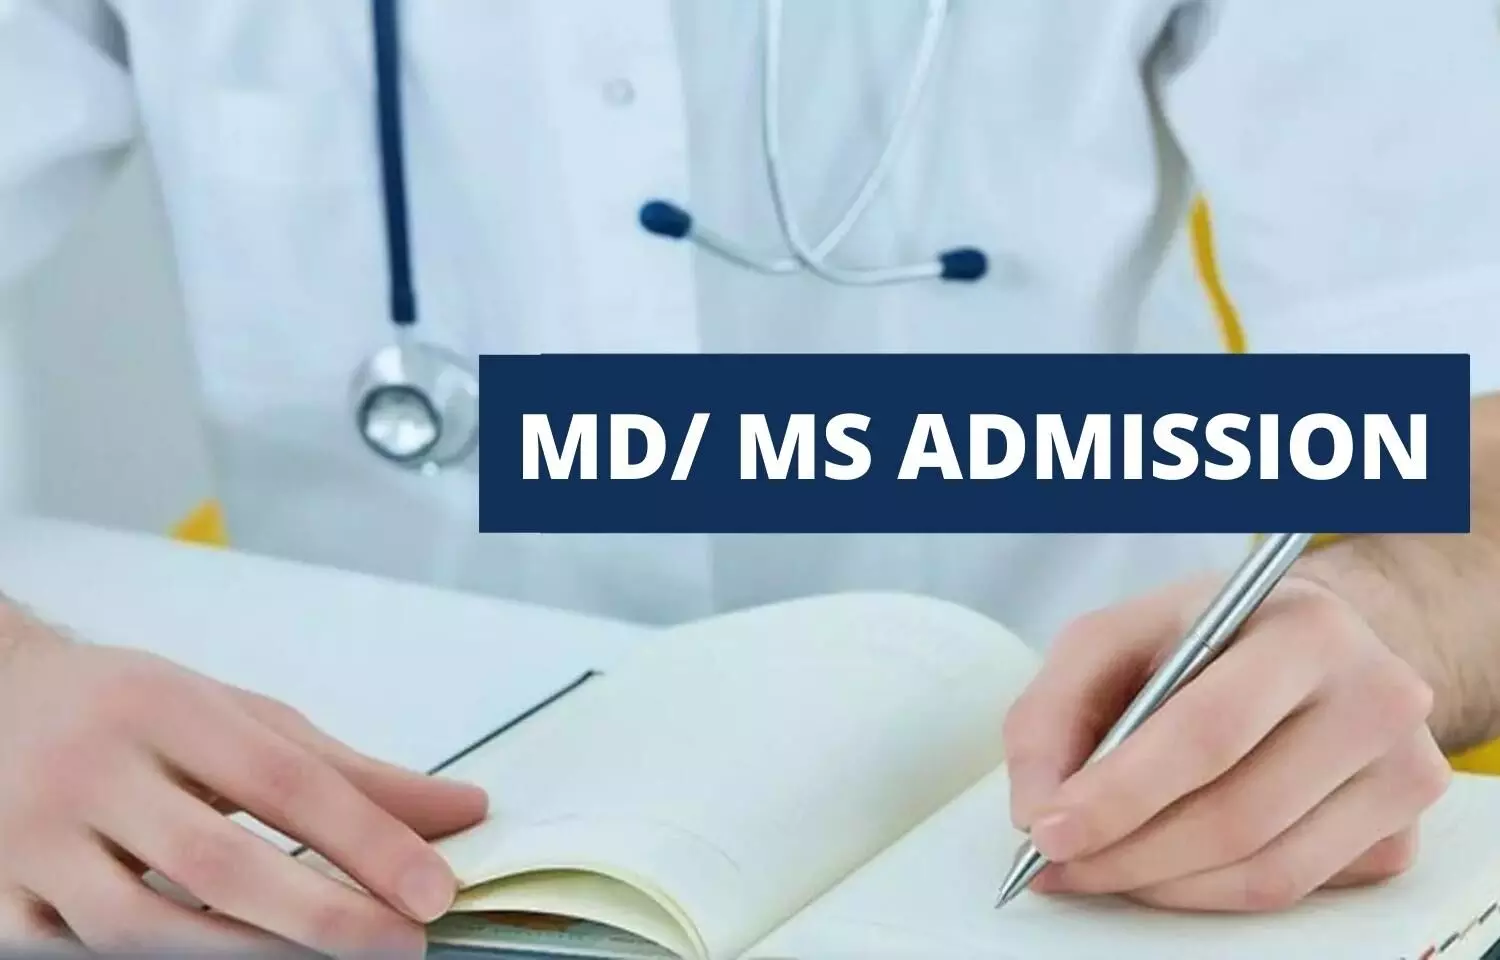 Round 1 MD, MS Counselling: JIPMER notifies on reporting, admission process, Check out Details